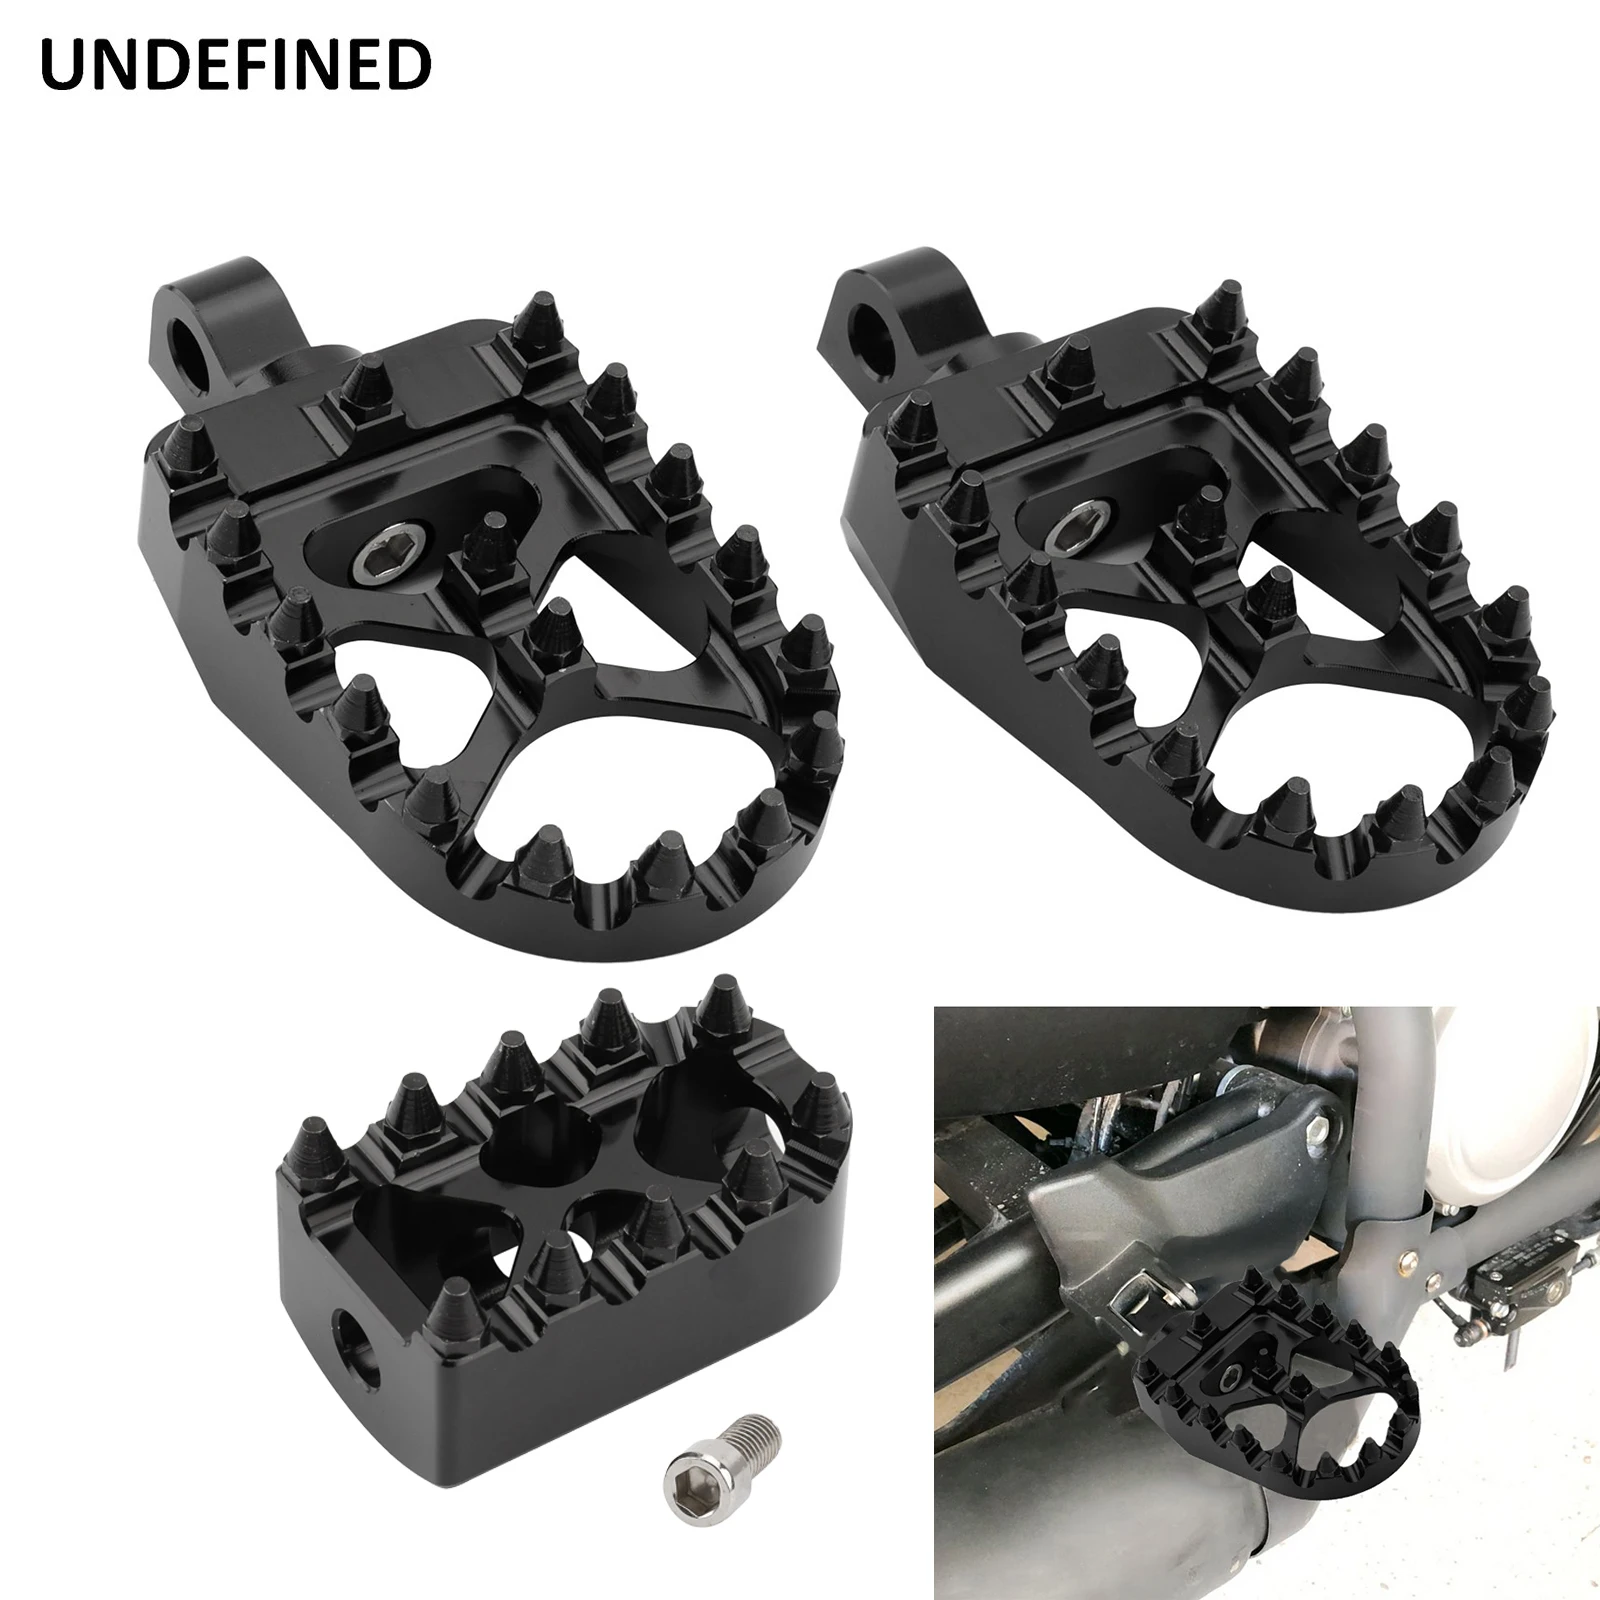 Oot pegs black spike mx footrest pedals gear shifter pegs for harley dyna sportster 883 thumb200